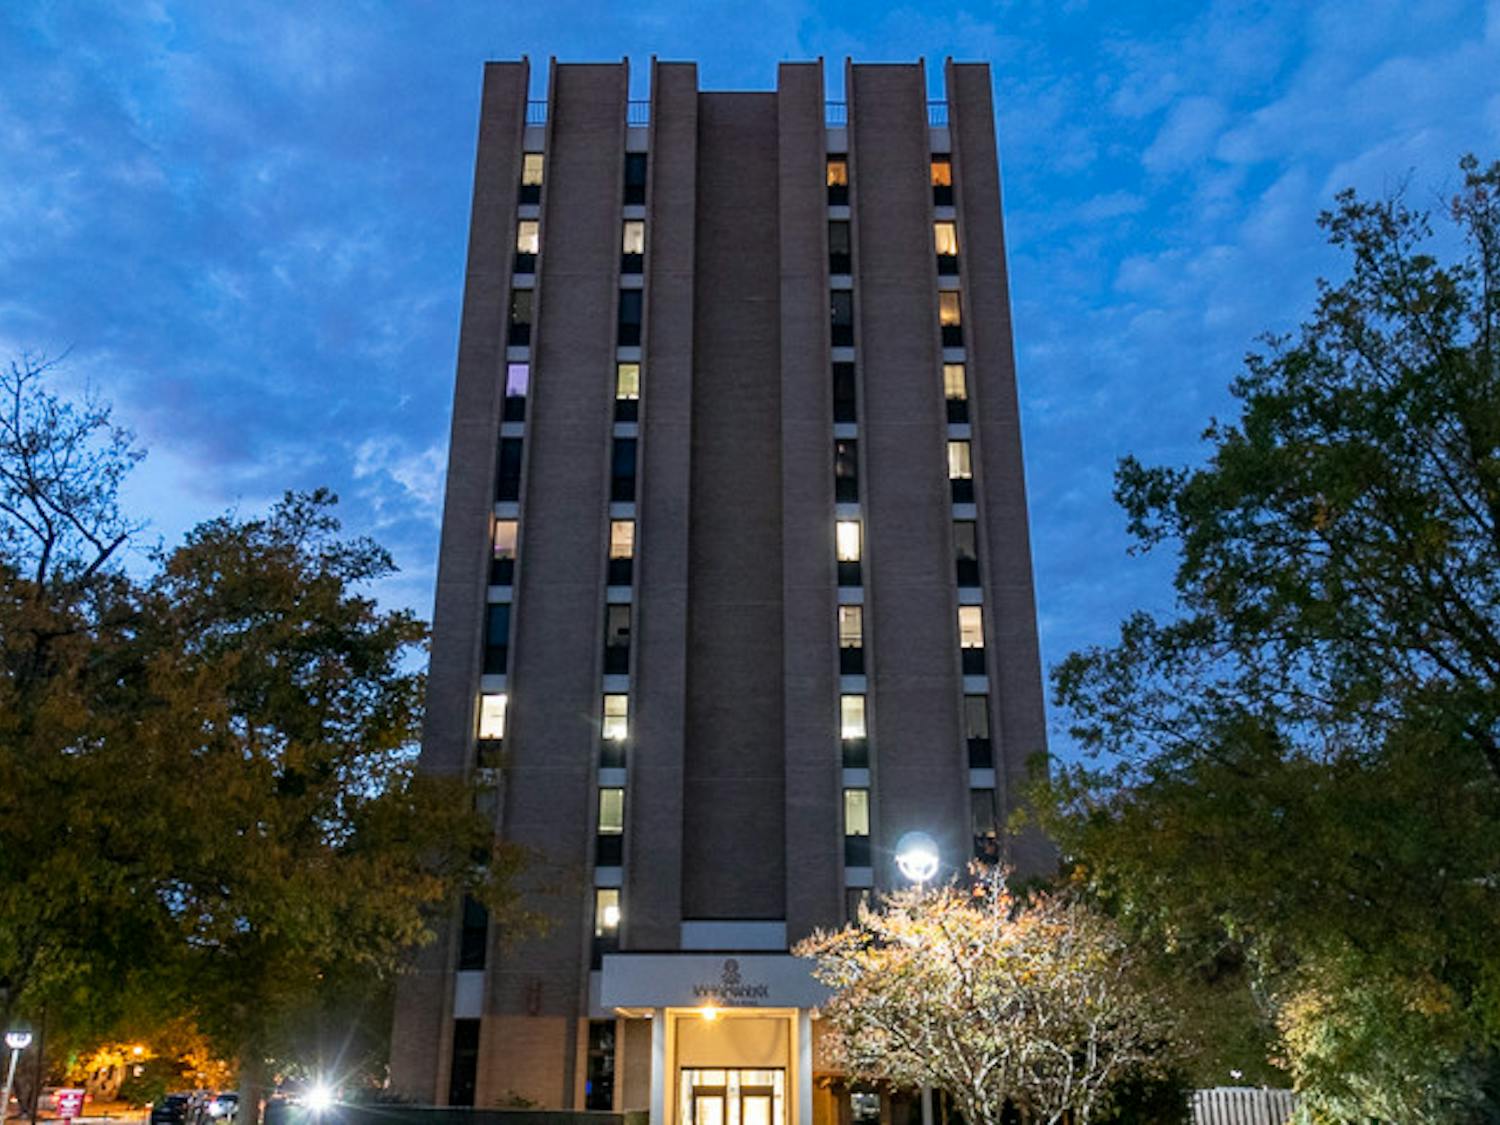 Ground view of Columbia Hall on Oct. 25, 2022. Residents have made complaints about getting sick due to mold growing in the dorms.&nbsp;